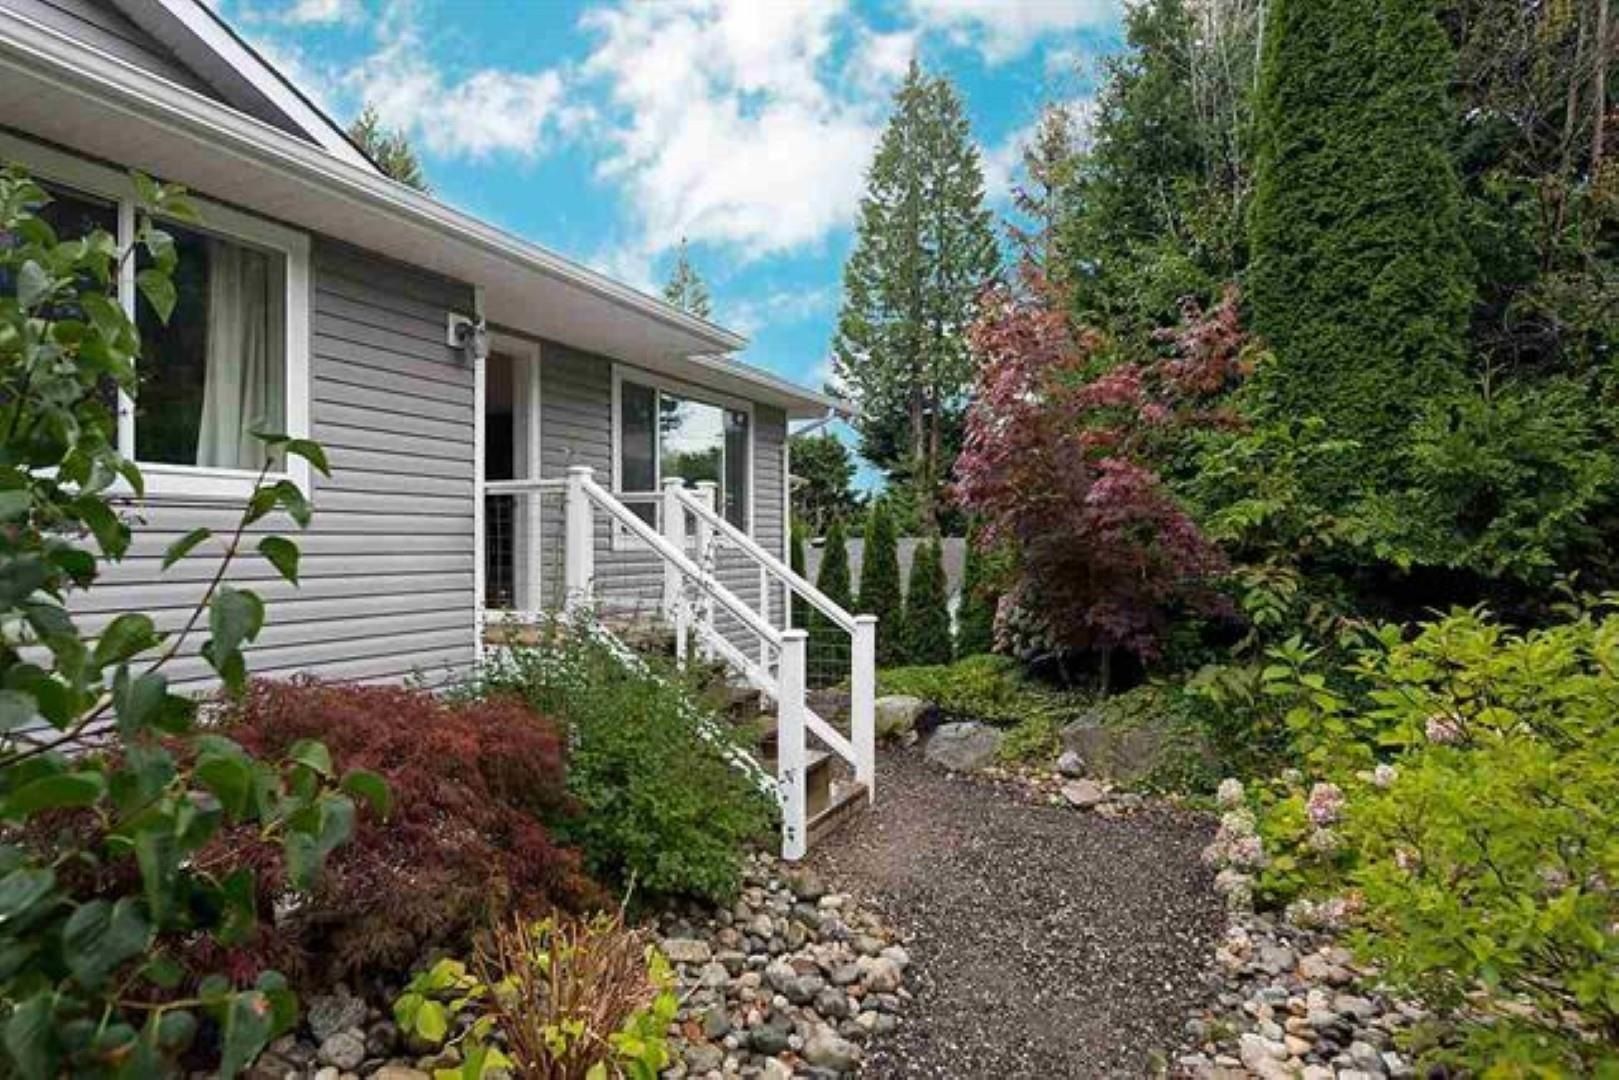 New property listed in Sechelt District, Sunshine Coast